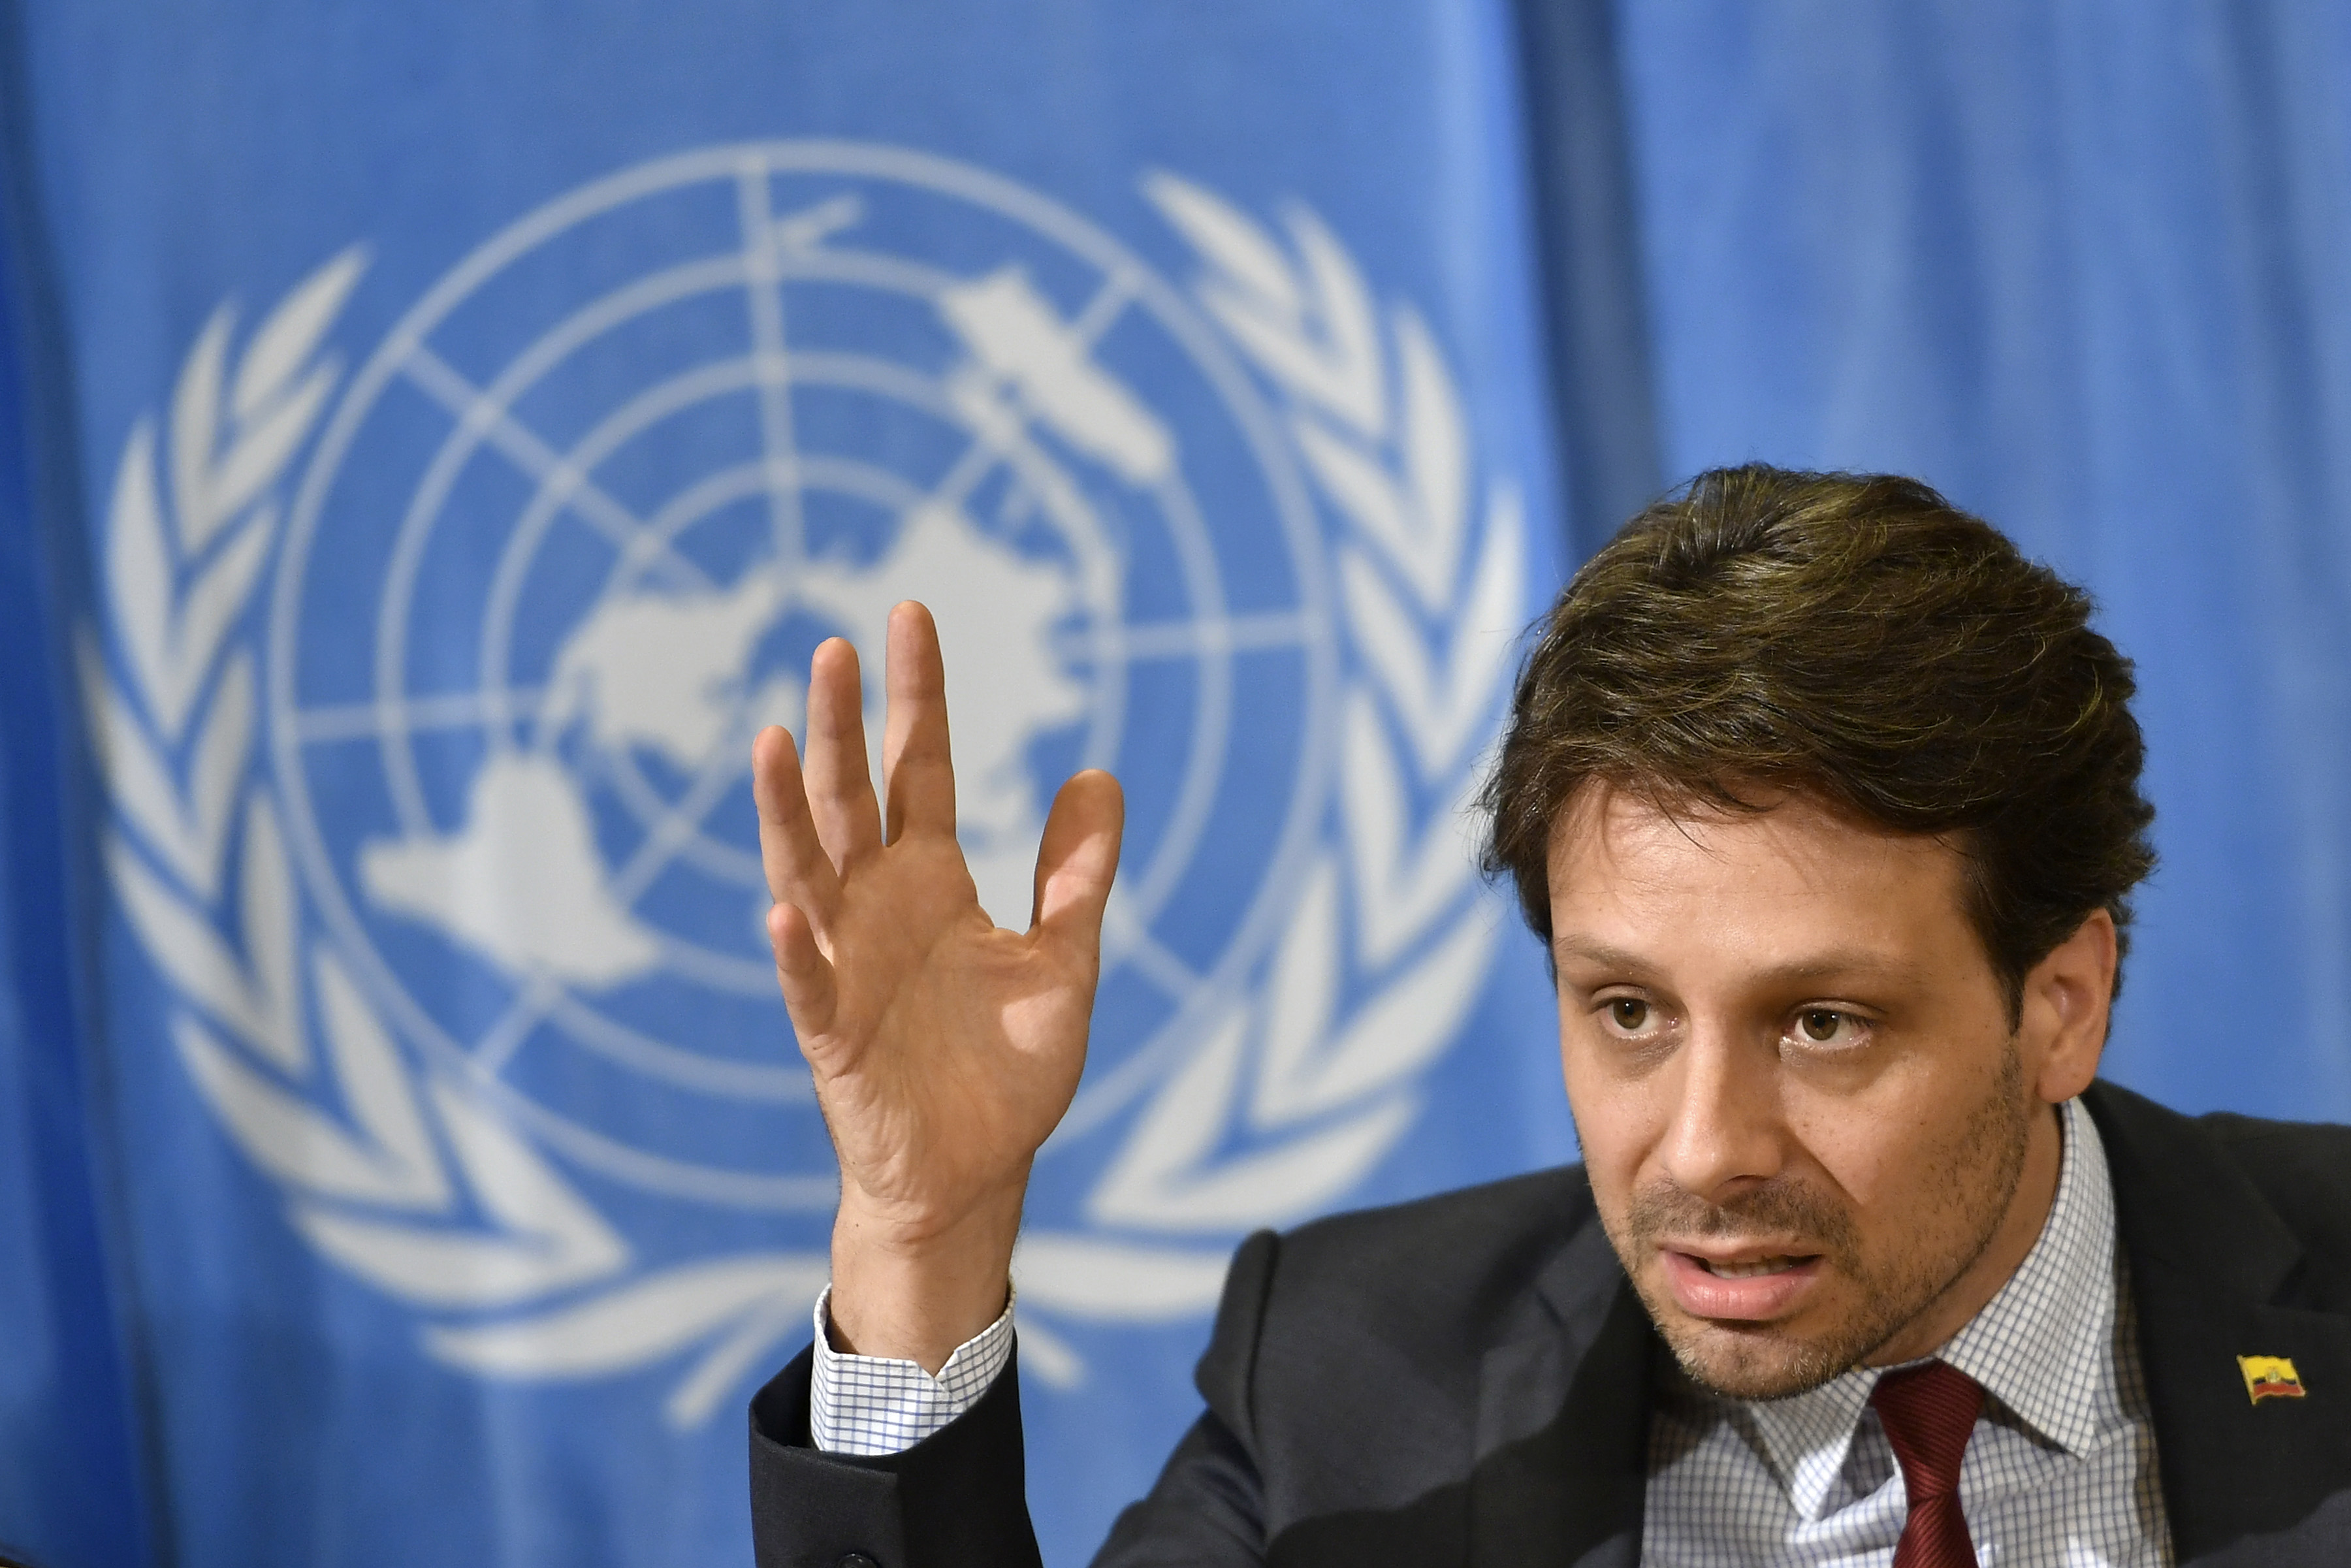 Ecuador's Minister of Foreign Affairs and Human Mobility Guillaume Long gestures during a press conference on WikiLeaks founder Julian Assange on June 29, 2016 at the United Nations offices in Geneva. Assange, 44, recently marked the start of his fifth year inside Ecuador's UK mission in a bid to avoid extradition. / AFP PHOTO / FABRICE COFFRINI